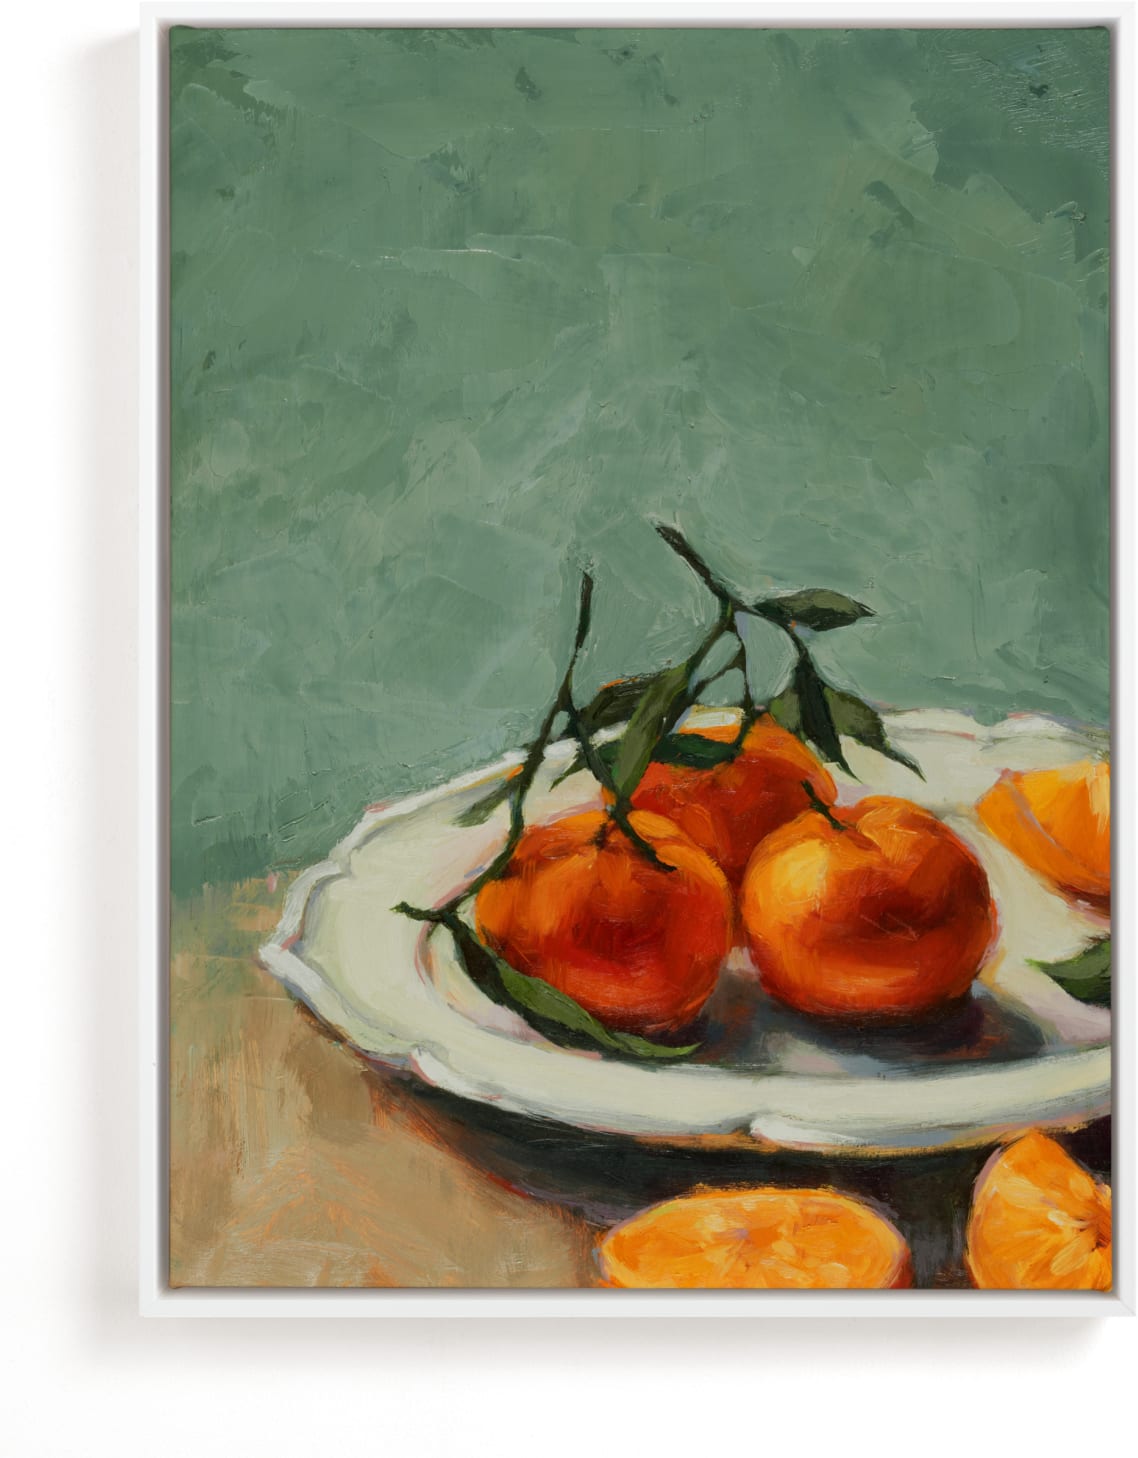 This is a orange art by Wendy Keller called Clementine.